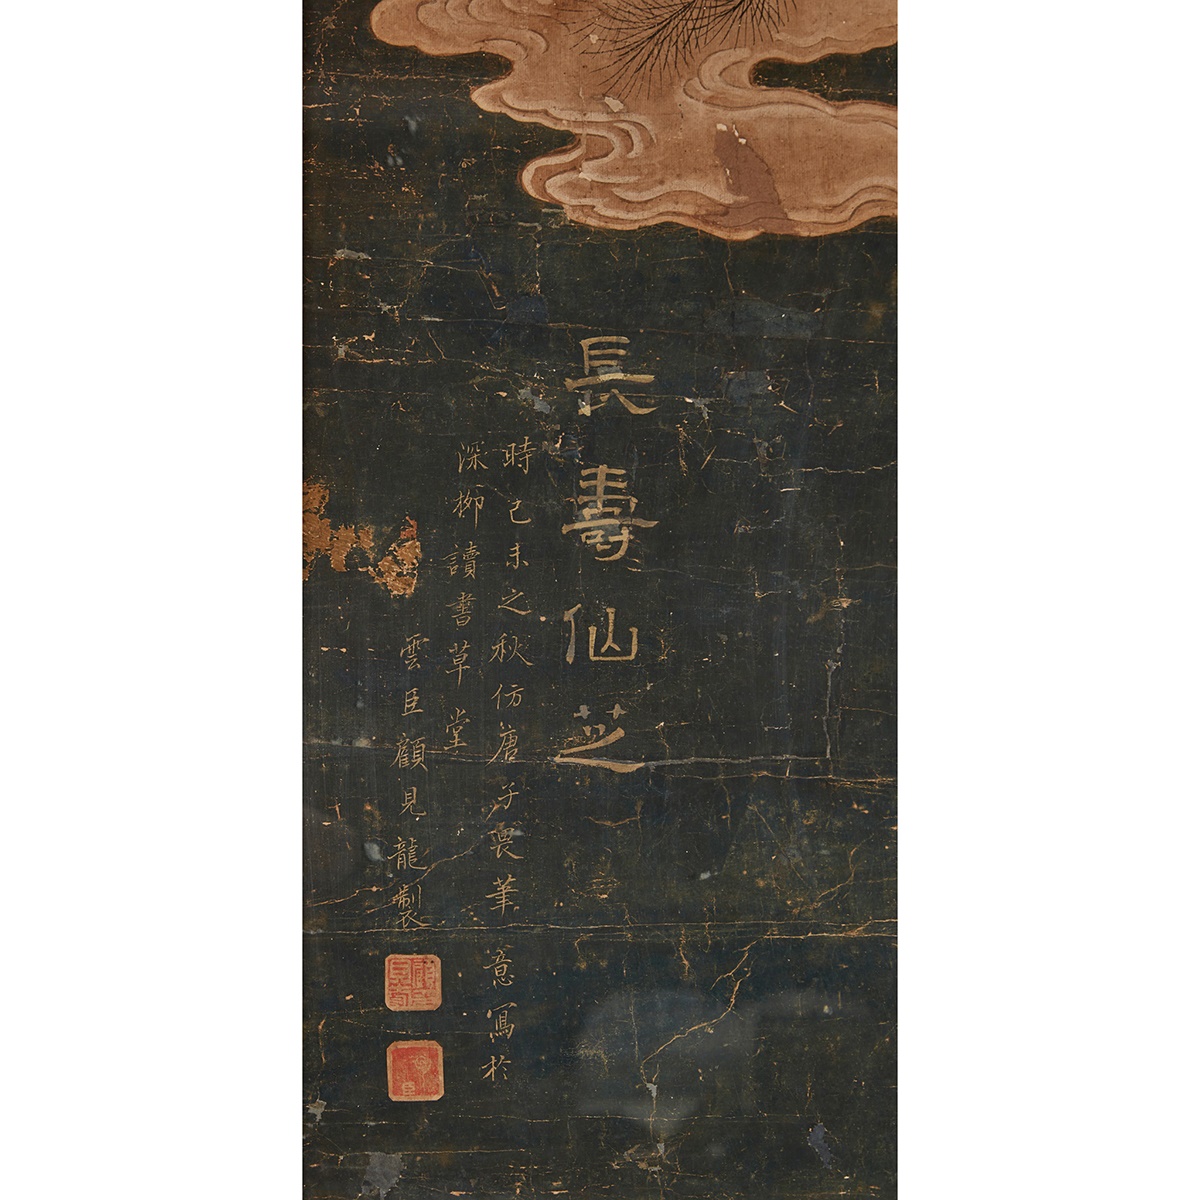 ATTRIBUTED TO GU JIANLONG (1606-AFTER 1687) LARGE INK PAINTING OF THE GOD OF LONGEVITY, SHOULAO AND BOY, QING DYNASTY, 19TH CENTURY